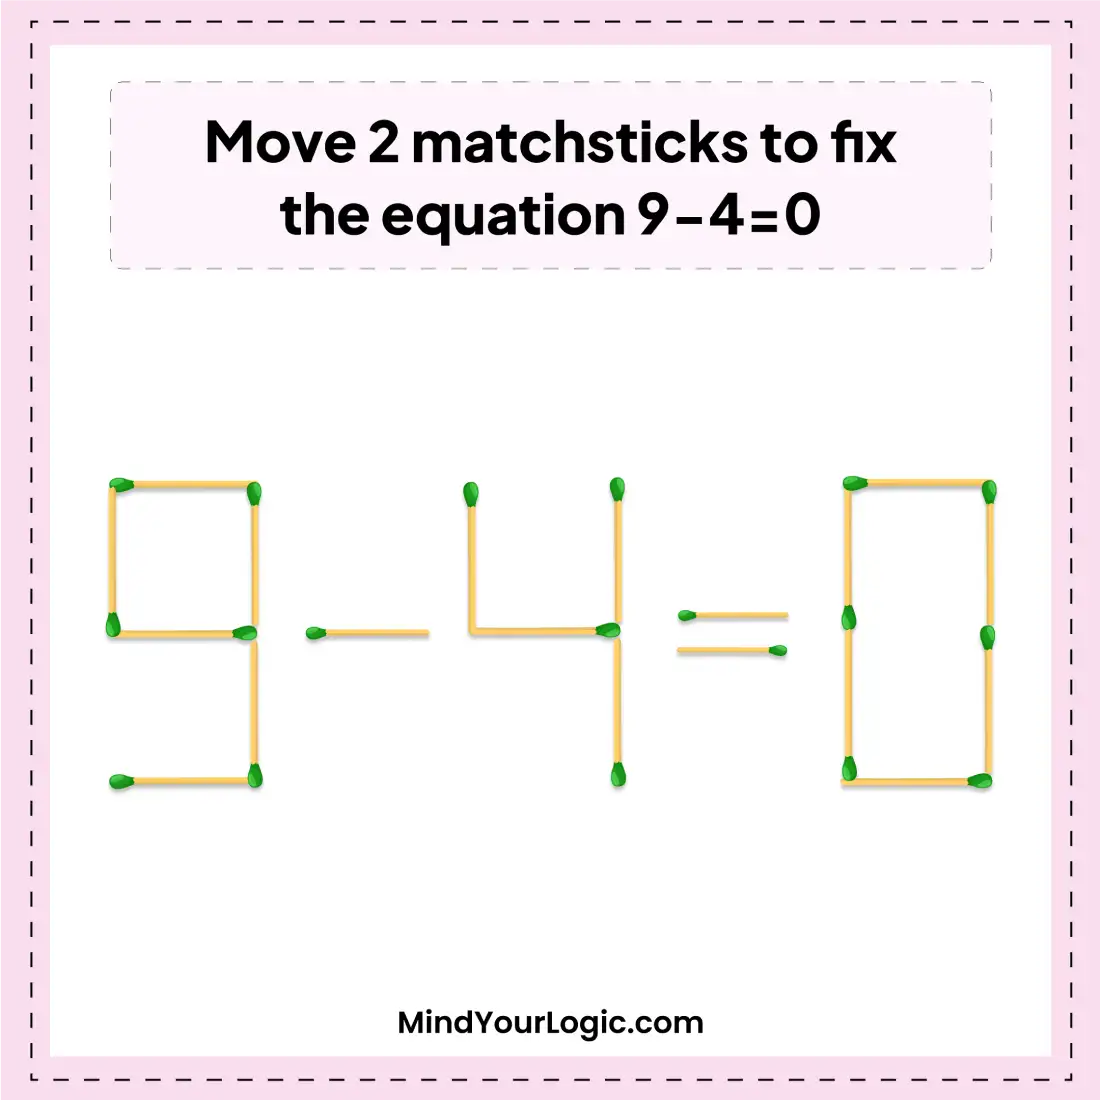 correct-the-equation-with-just-2-matchsticks-moves-9-4=0-img-1